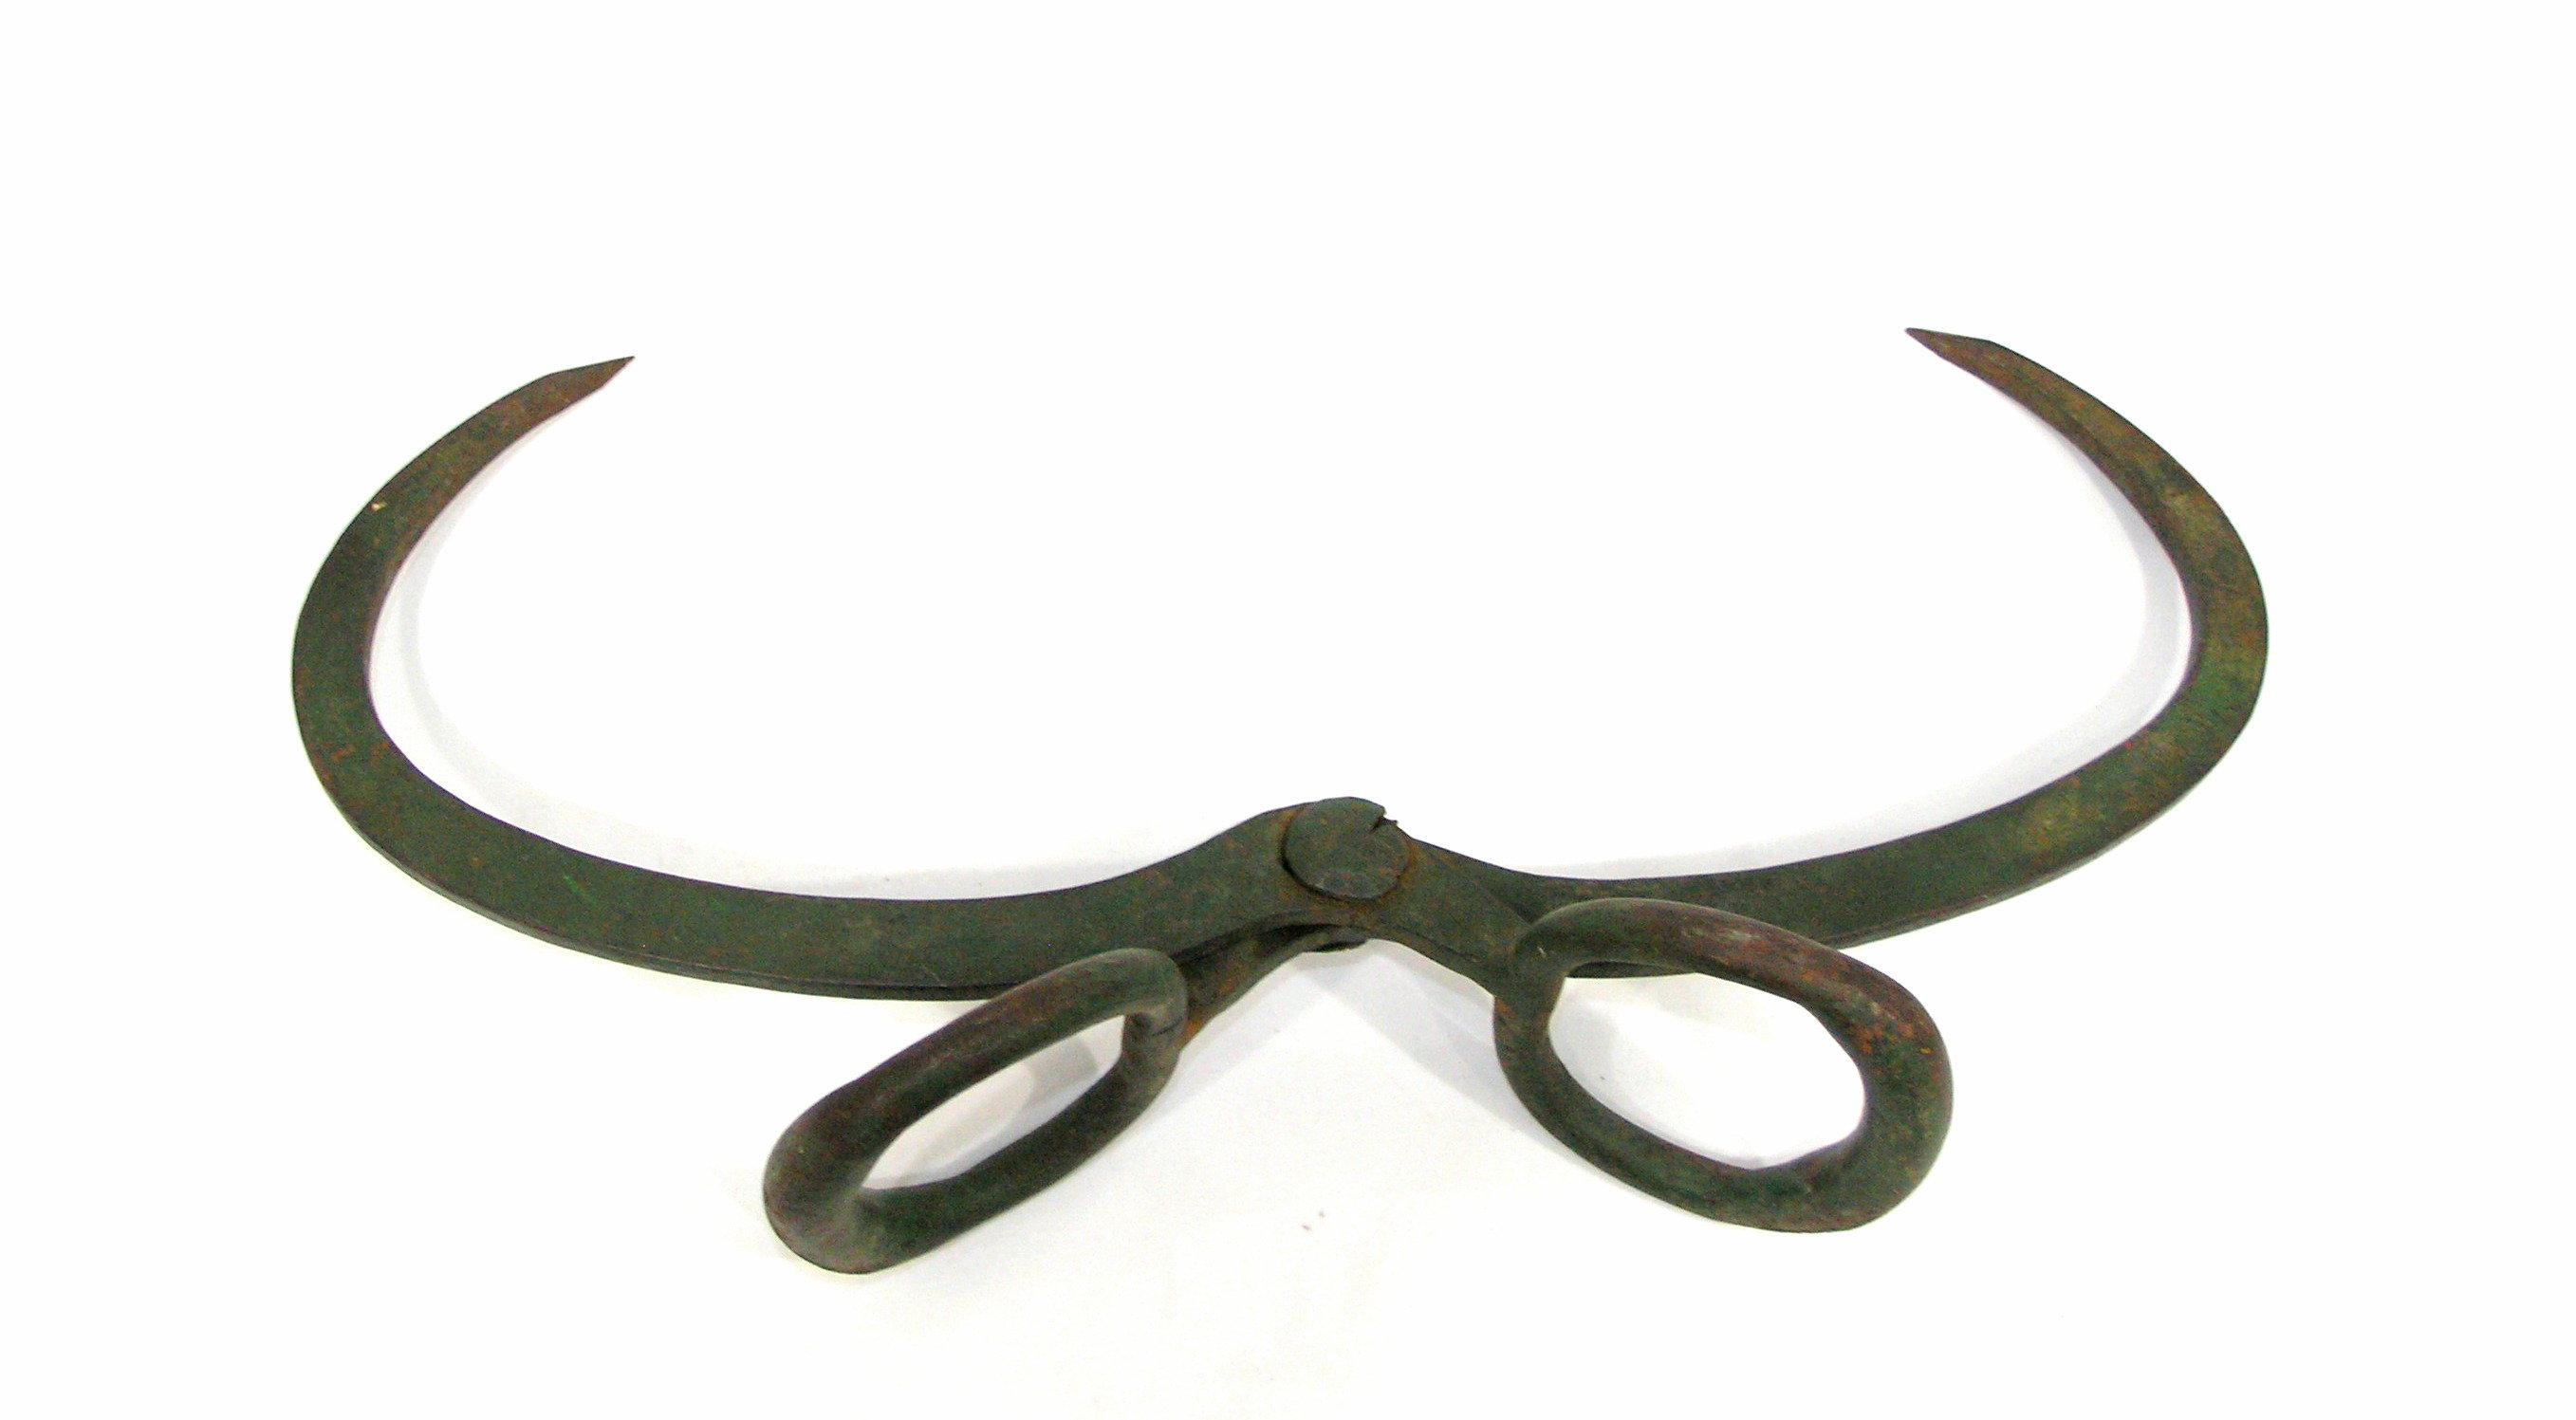 Early Century Ice tongs. Jaws fully opened are 13-3/4".